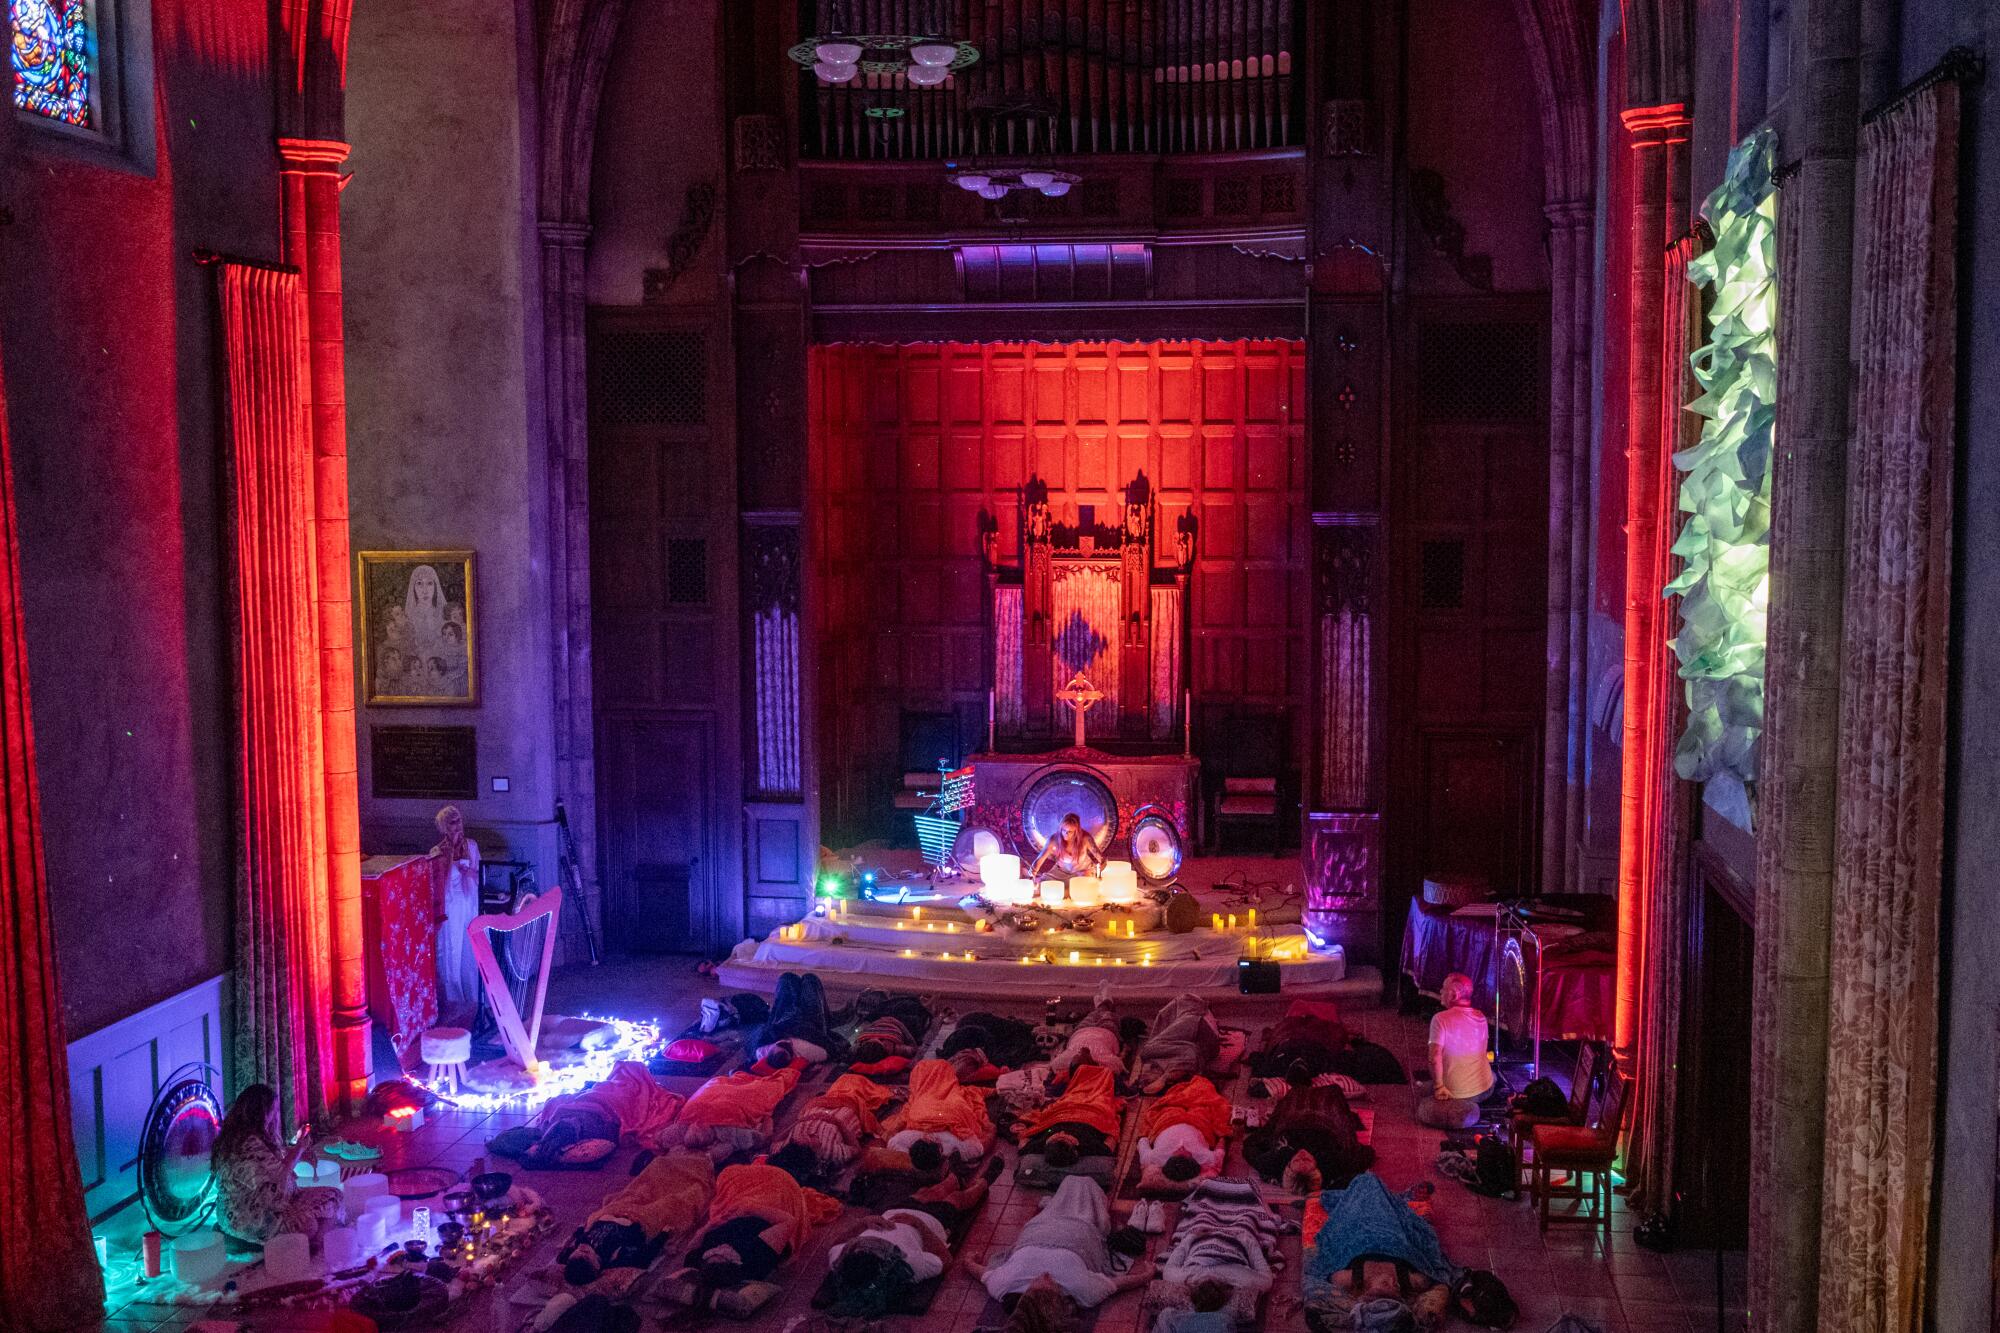 Sound bath guests lay on the floor in a neo-Gothic church. A harp, glowing bowls and uplighting fills the room.